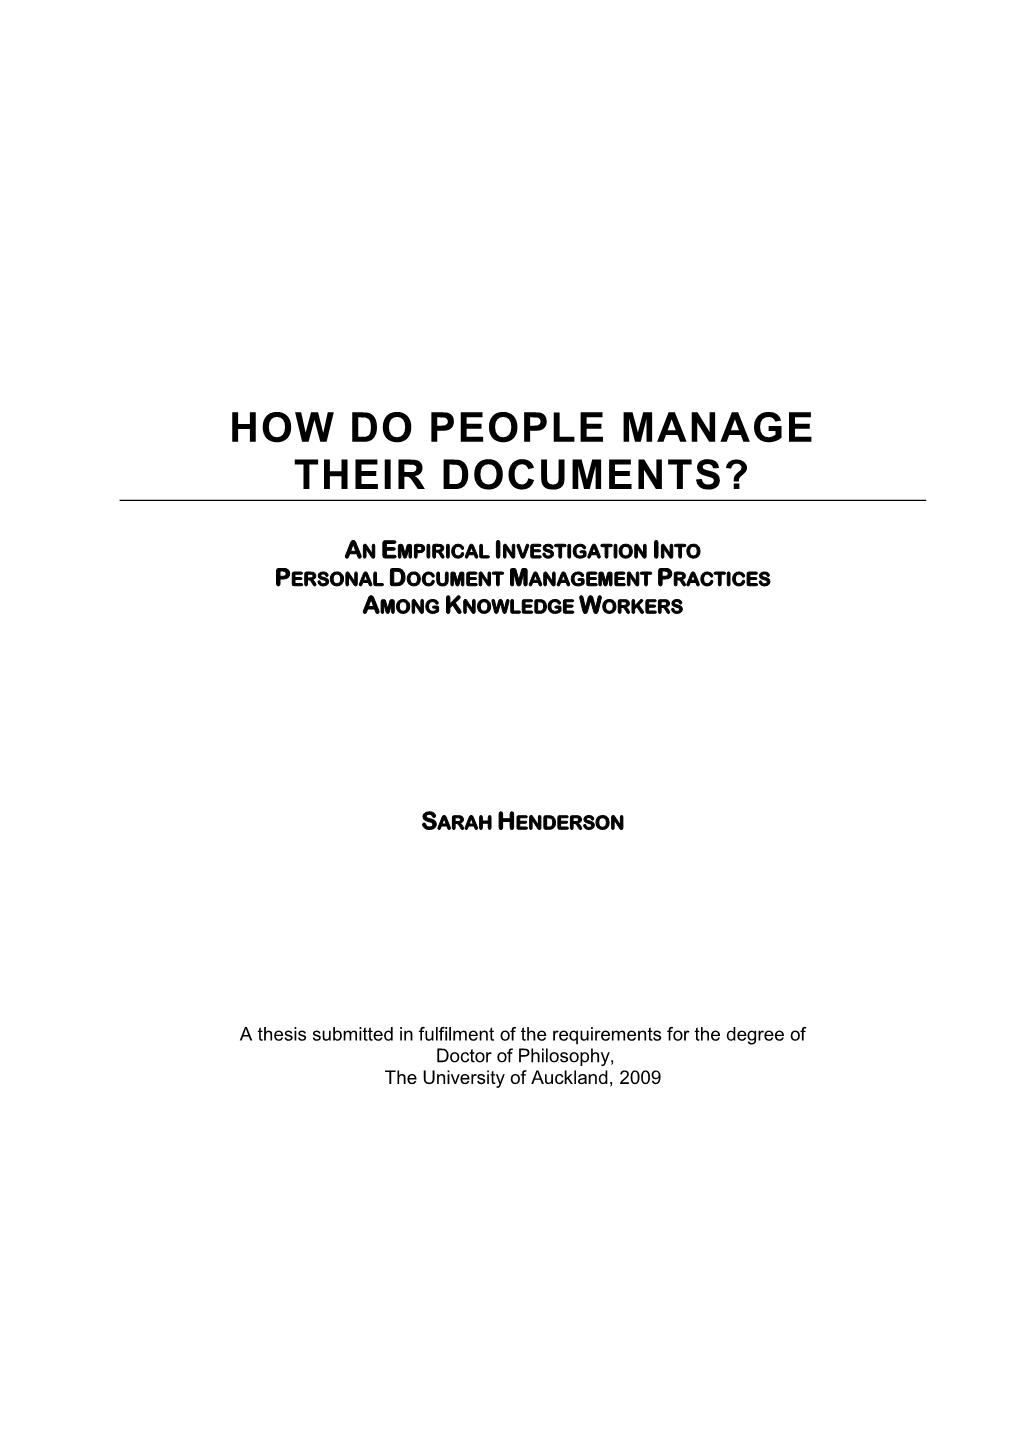 How Do People Manage Their Documents?